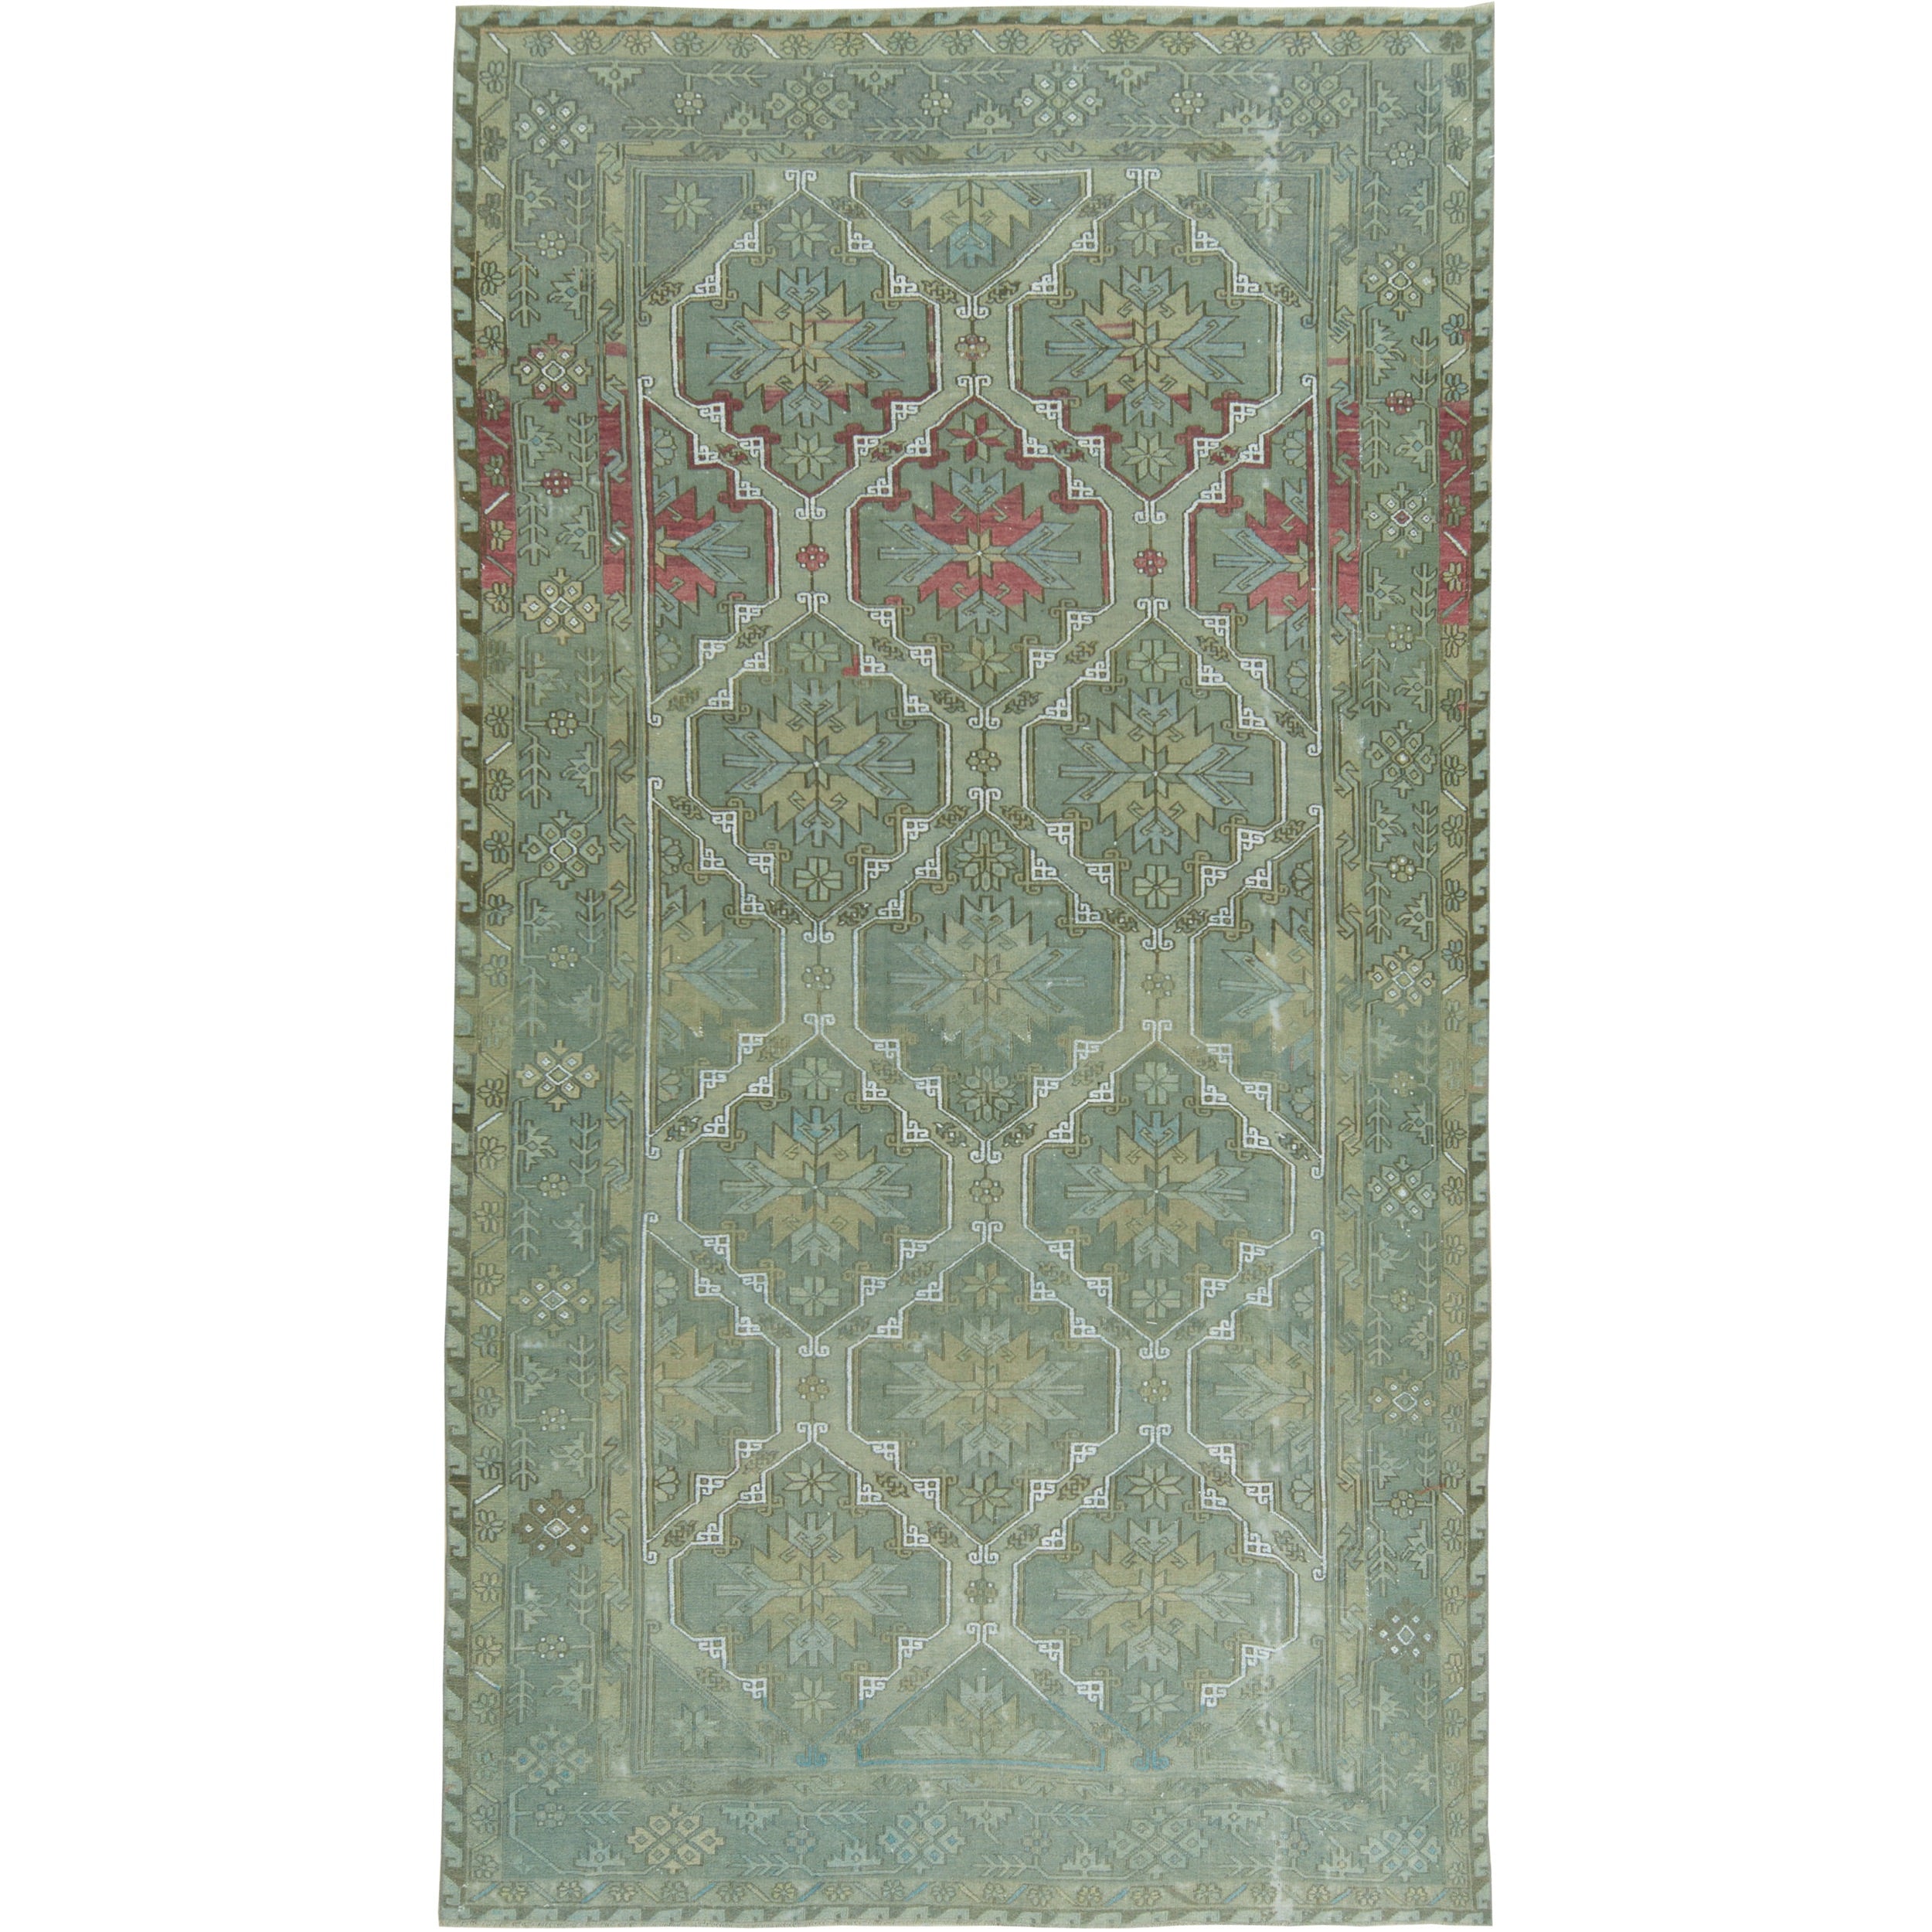 Kylie - A Green Haven of Persian Artistry | Kuden Rugs